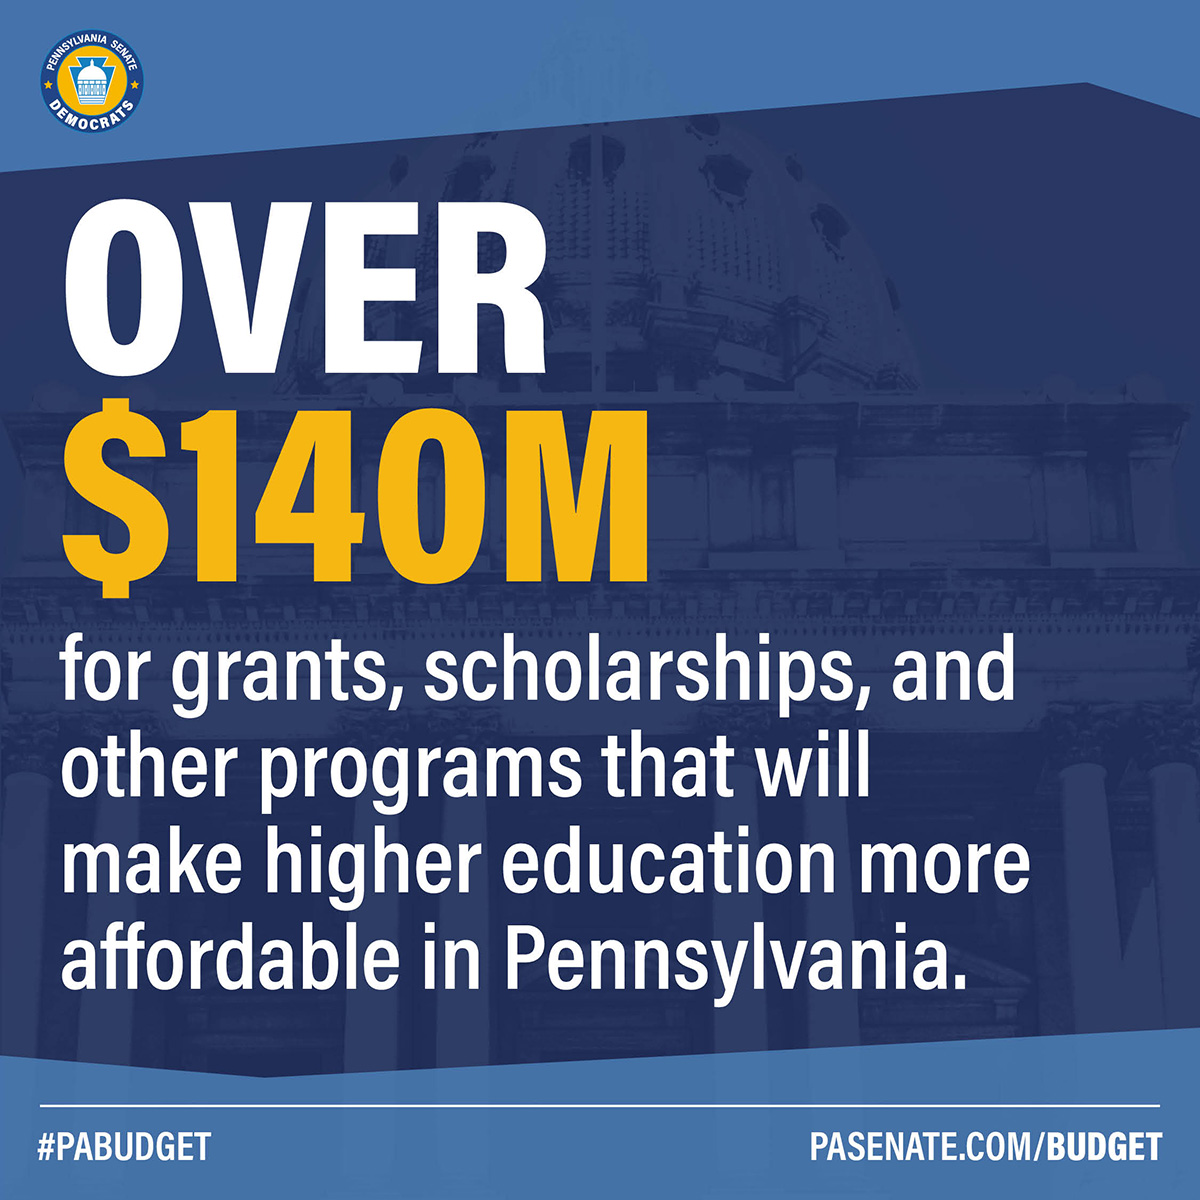 Over $140M for grants, scholarships and other programs that will make higher education more affordable in PA